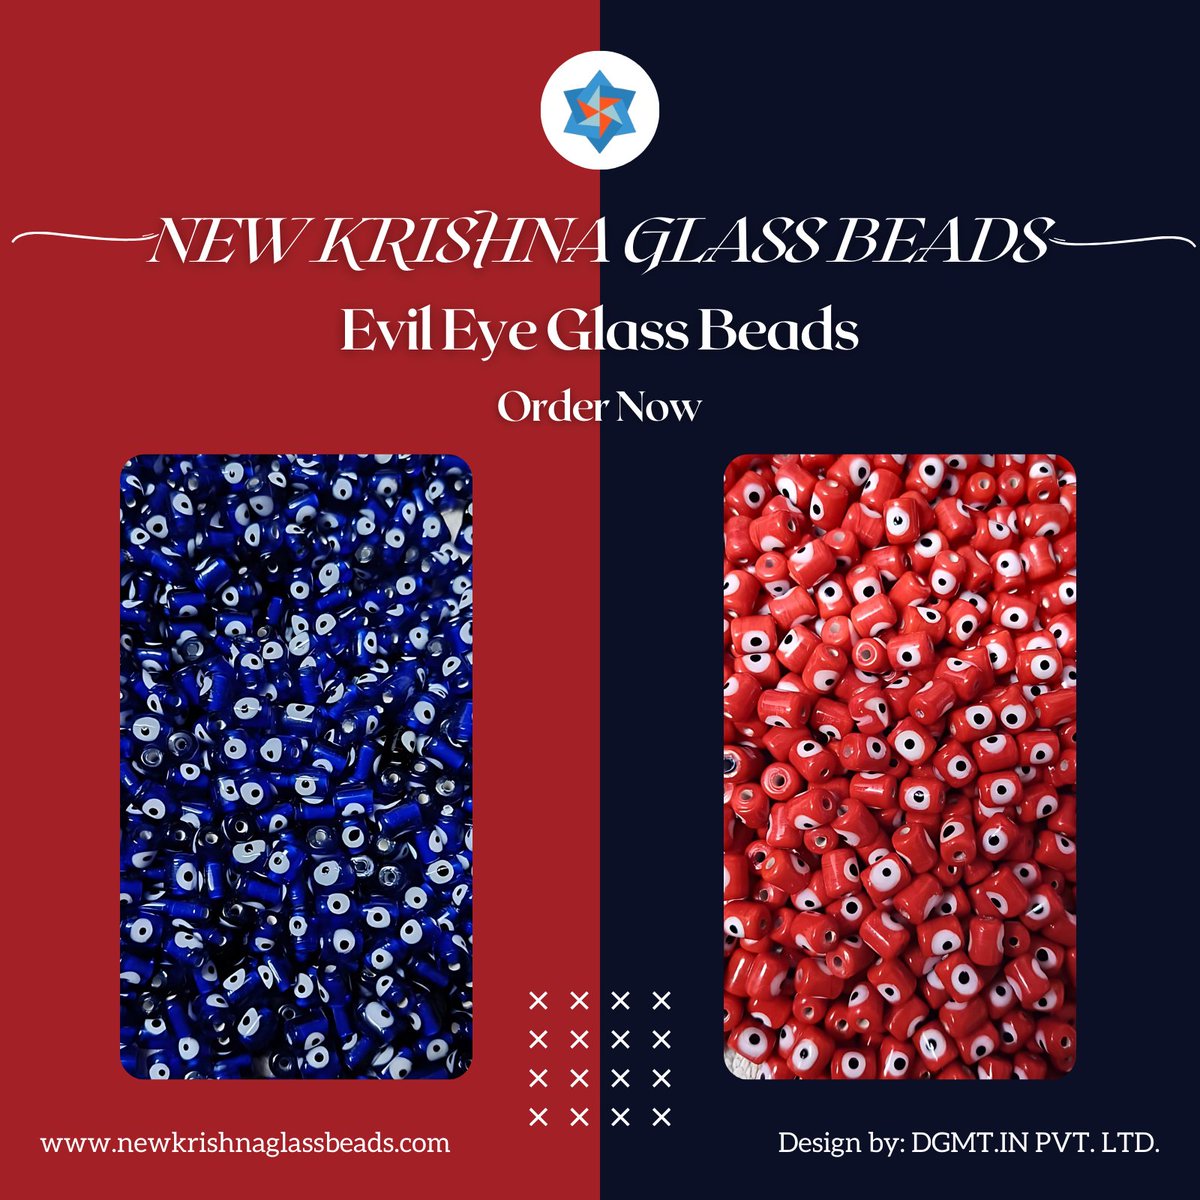 Don't miss out on your chance for a unique evil eye beads deal! Reach out today to lock in your special offer. Move quickly and make it yours before it's gone!

#KrishnaGlassBeads #Craftsmanship #UniqueStyle #KrishnaGlassBeads #CraftedWithPrecision #GlassBeads #ArtisticPerfection